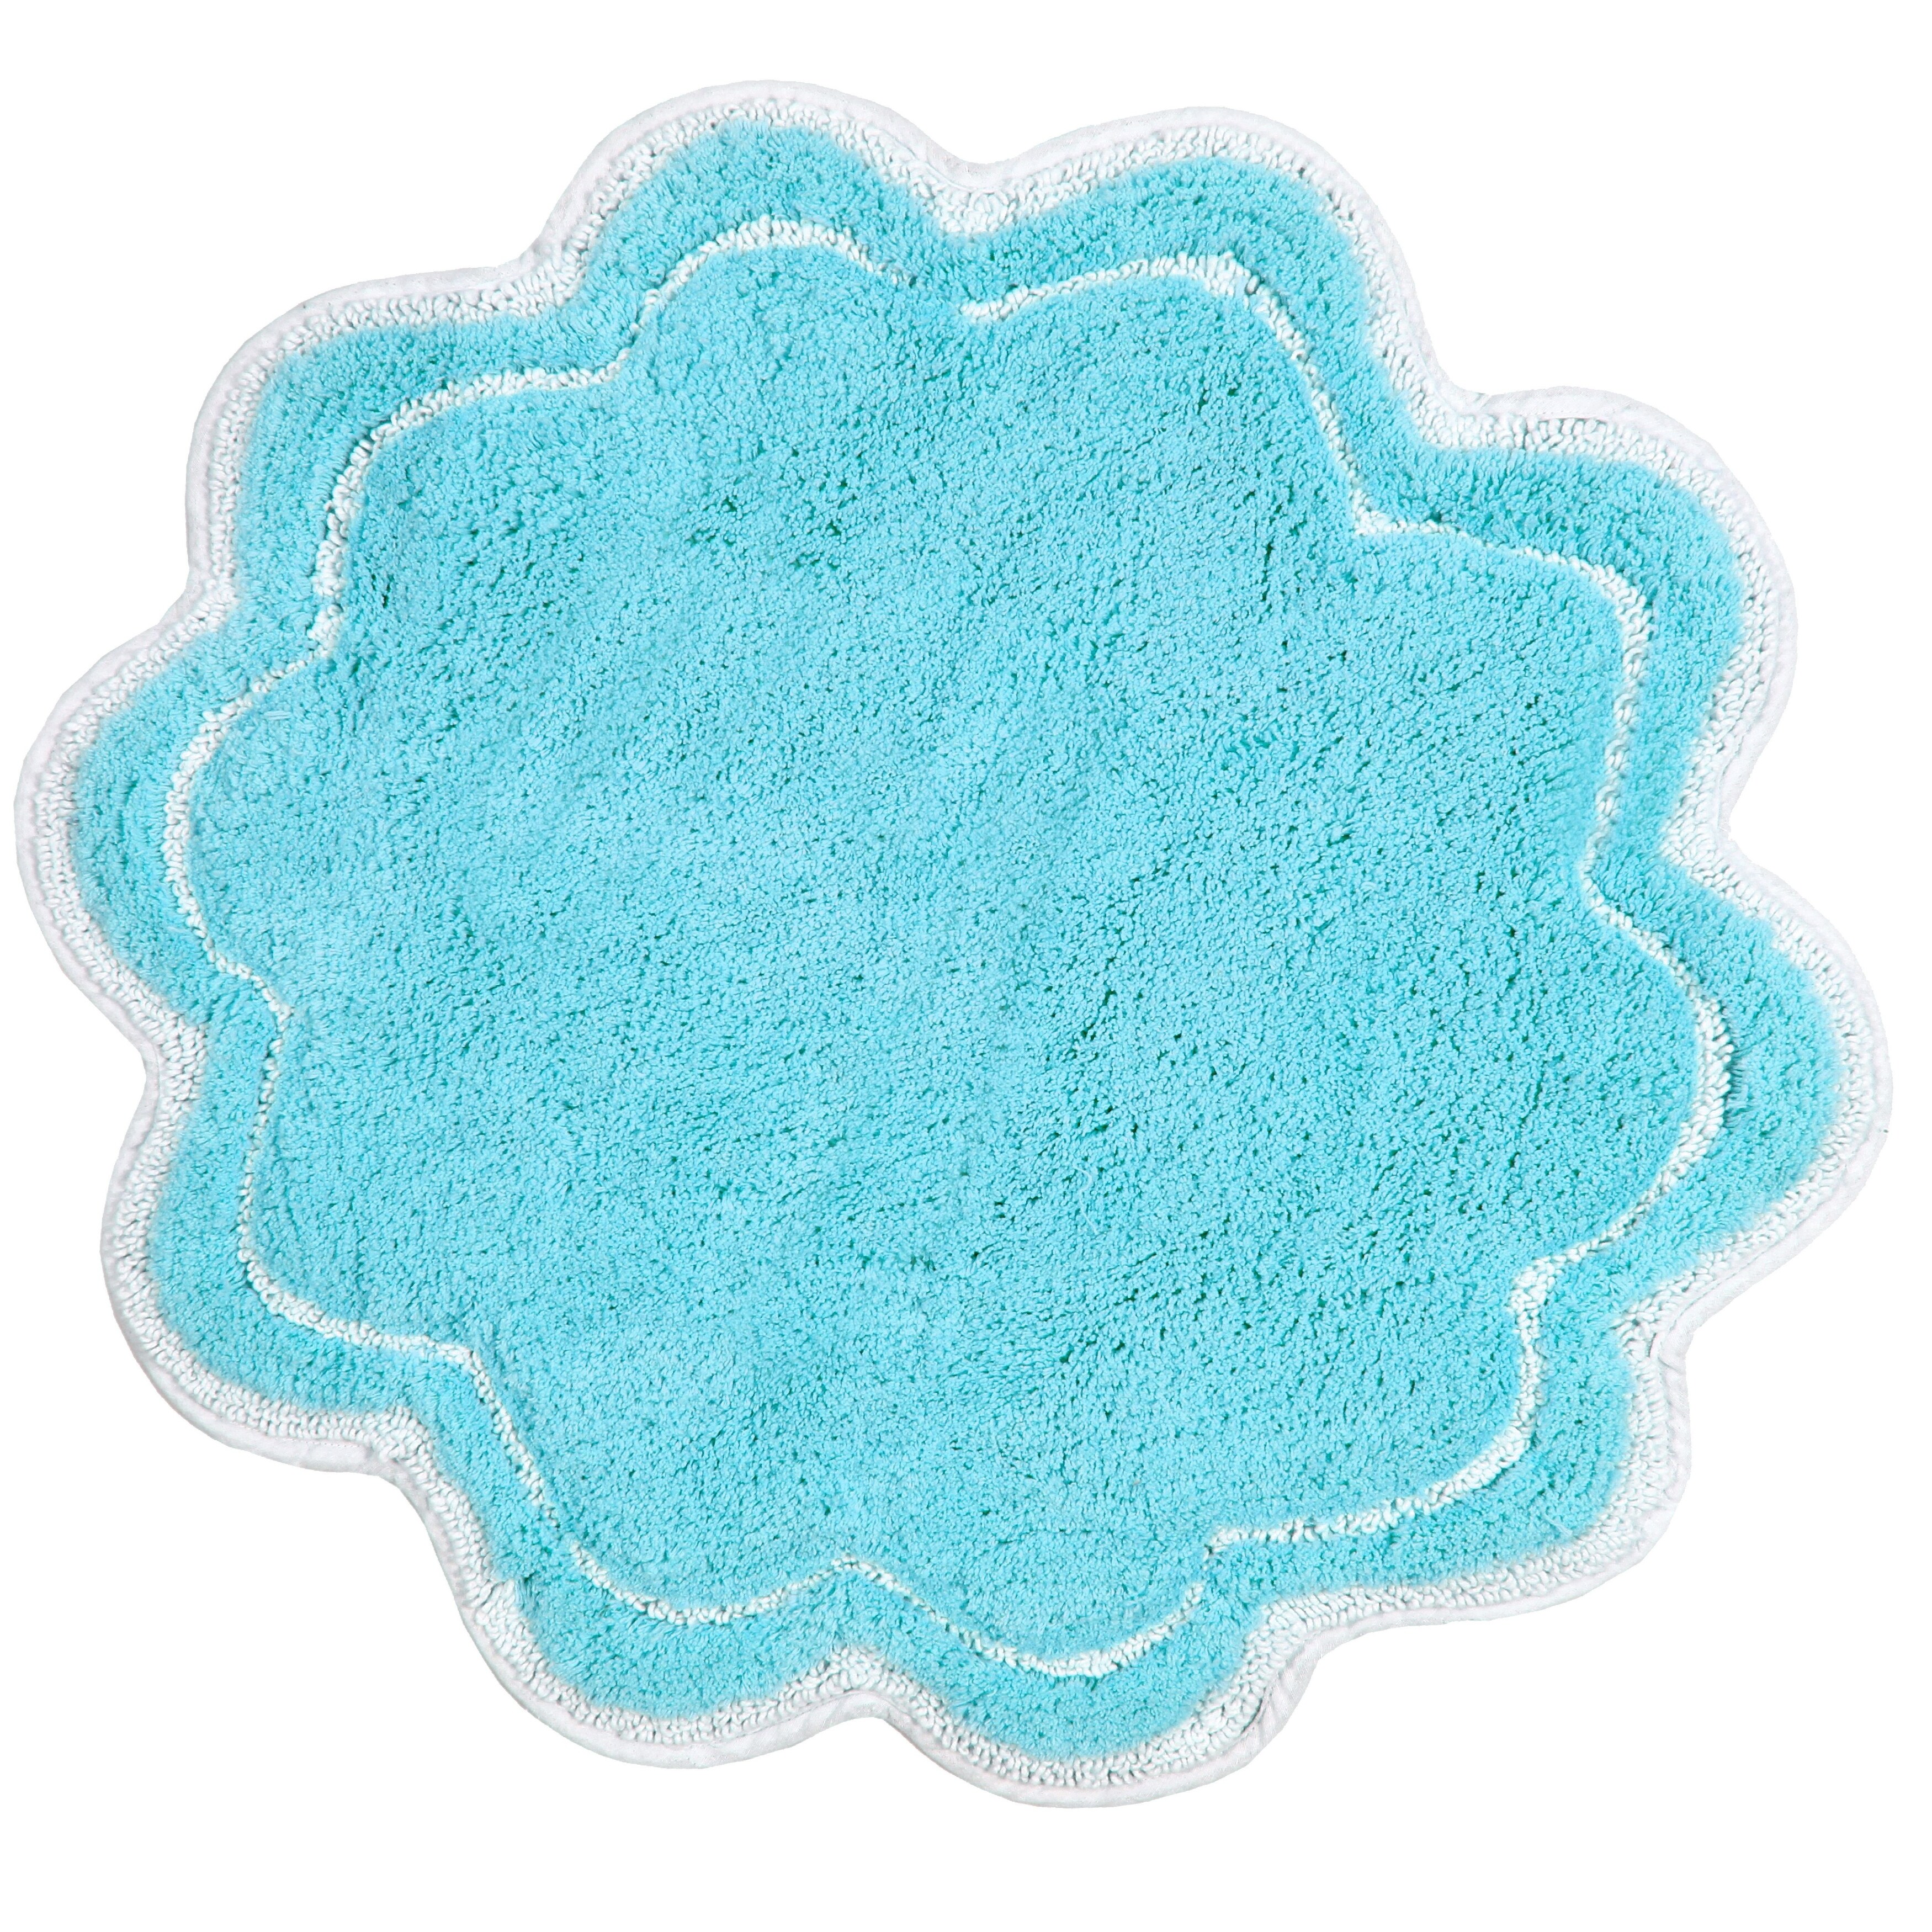 Home Weavers Allure Collection 100% Cotton Tufted Supersoft and Absorbent Bath Rug Machine Washable Tumble Dry, 17 inch x 24 inch Rectangle, Turquoise